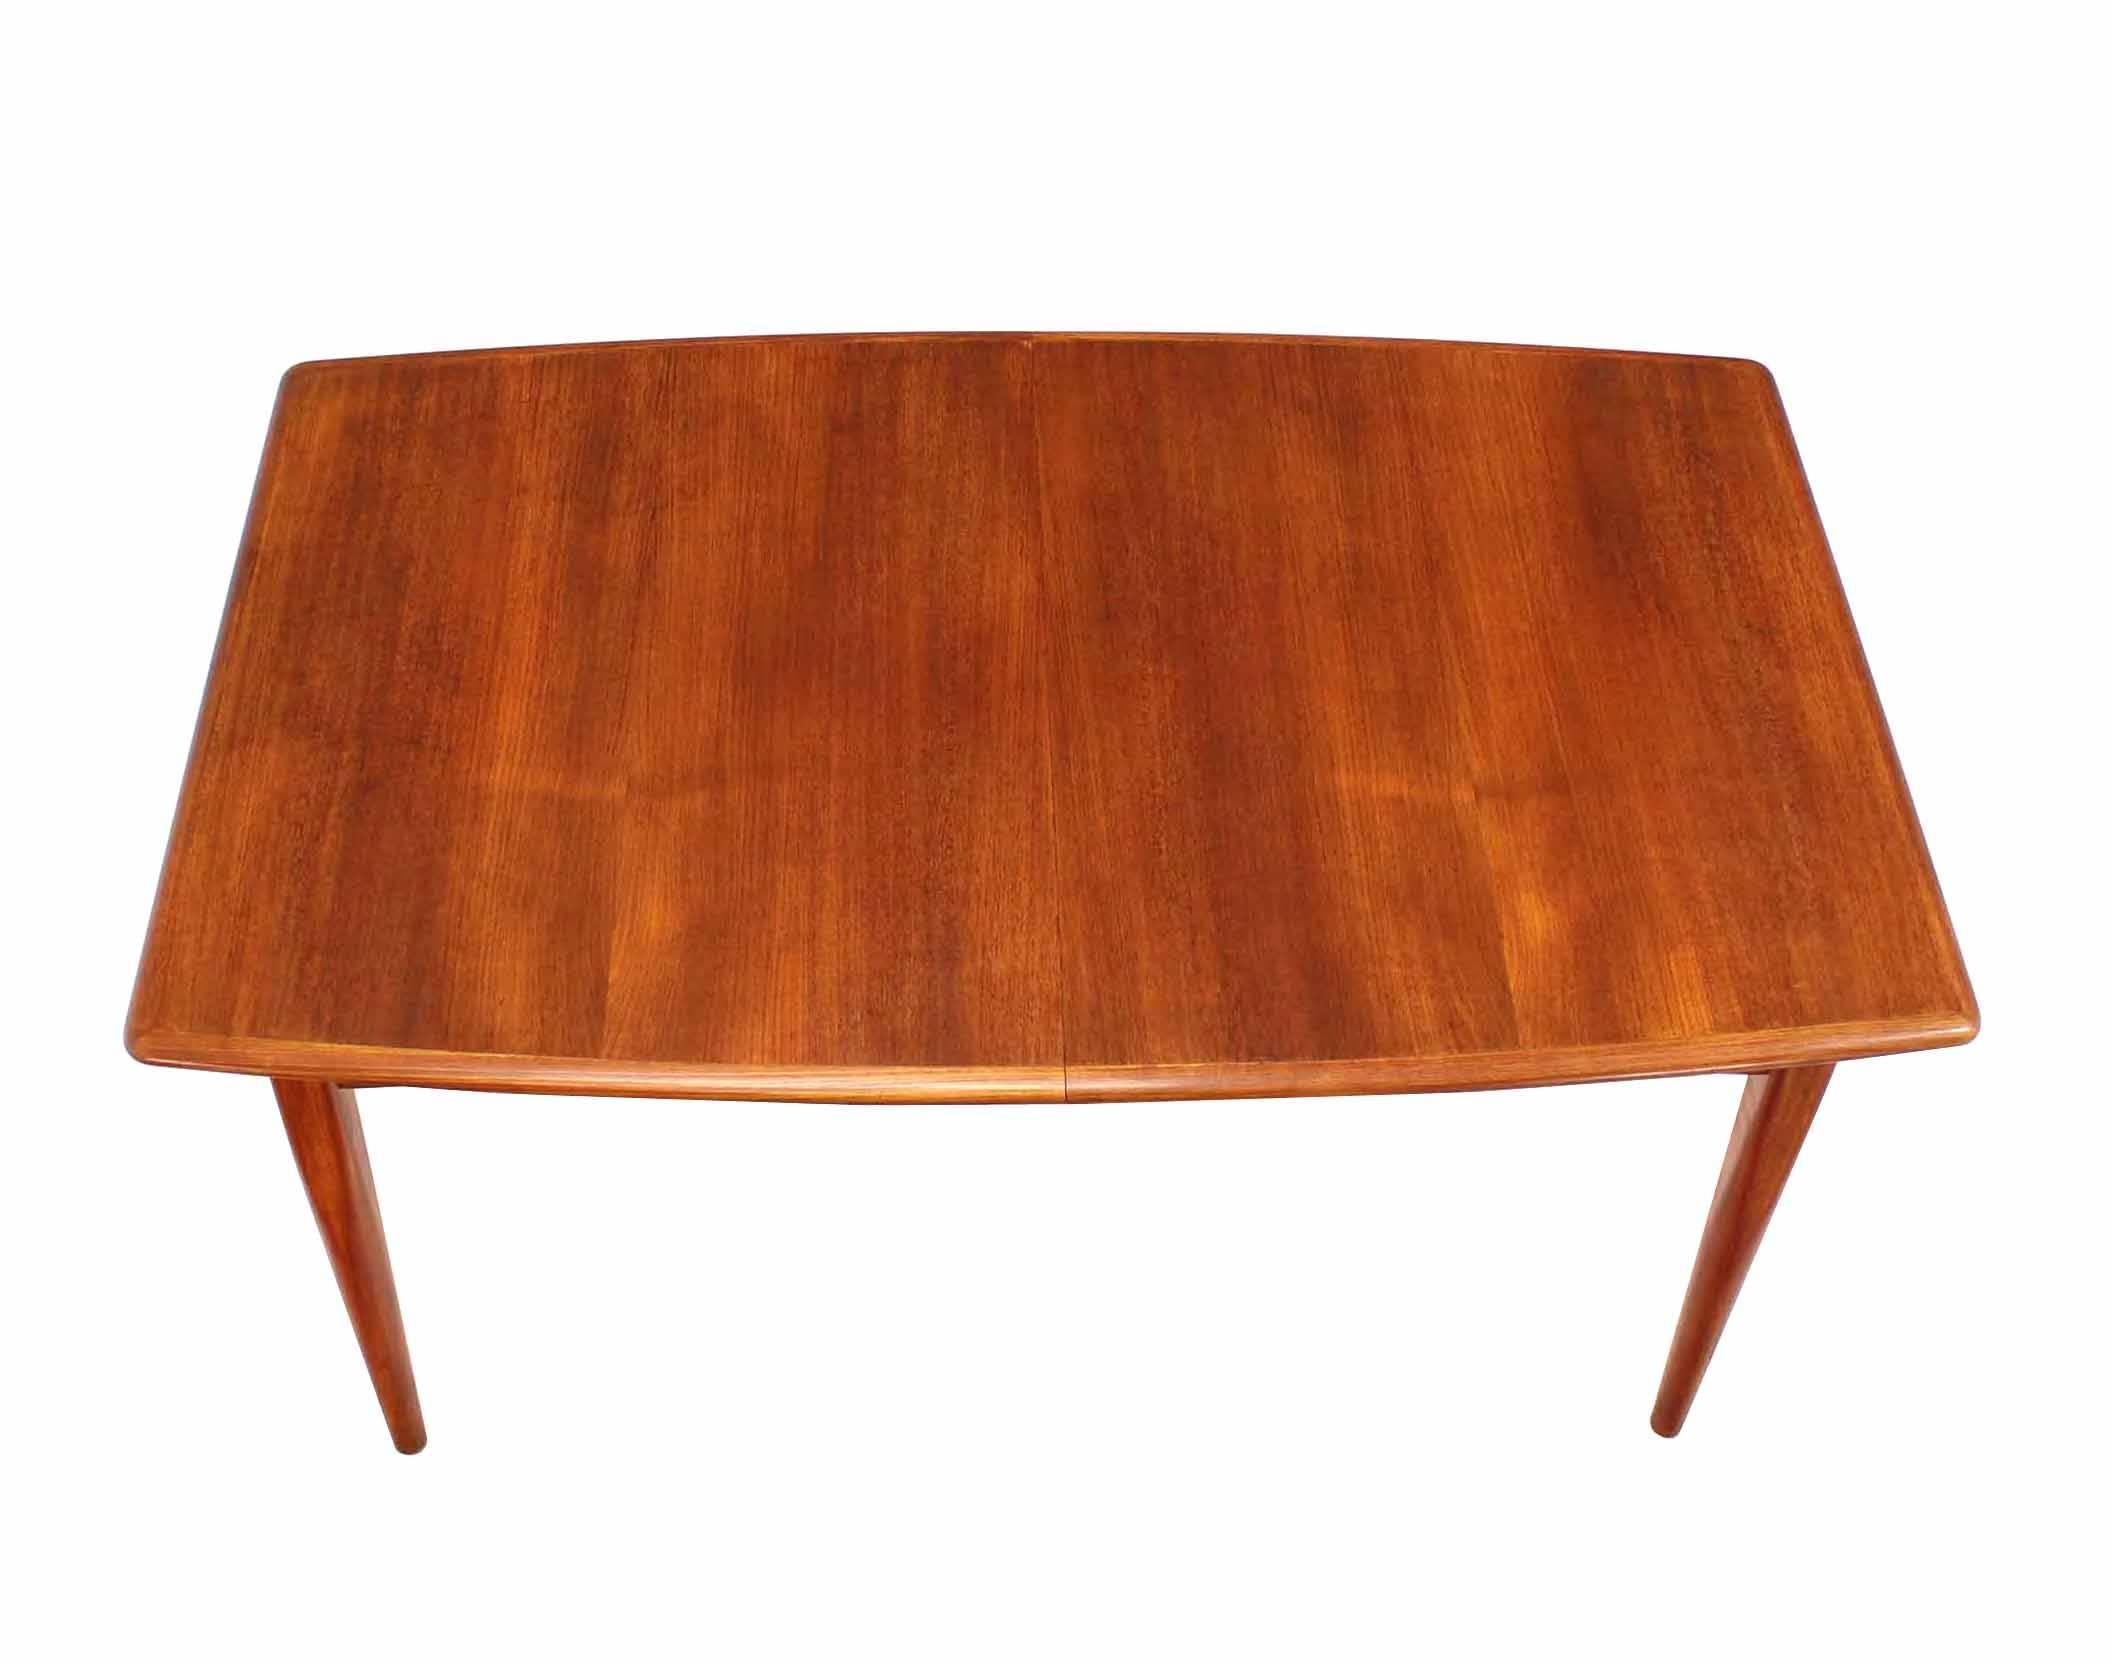 Lacquered Danish Modern Teak Boat Shape Dining Table with Two Pop-Up Leafs Extension Board For Sale